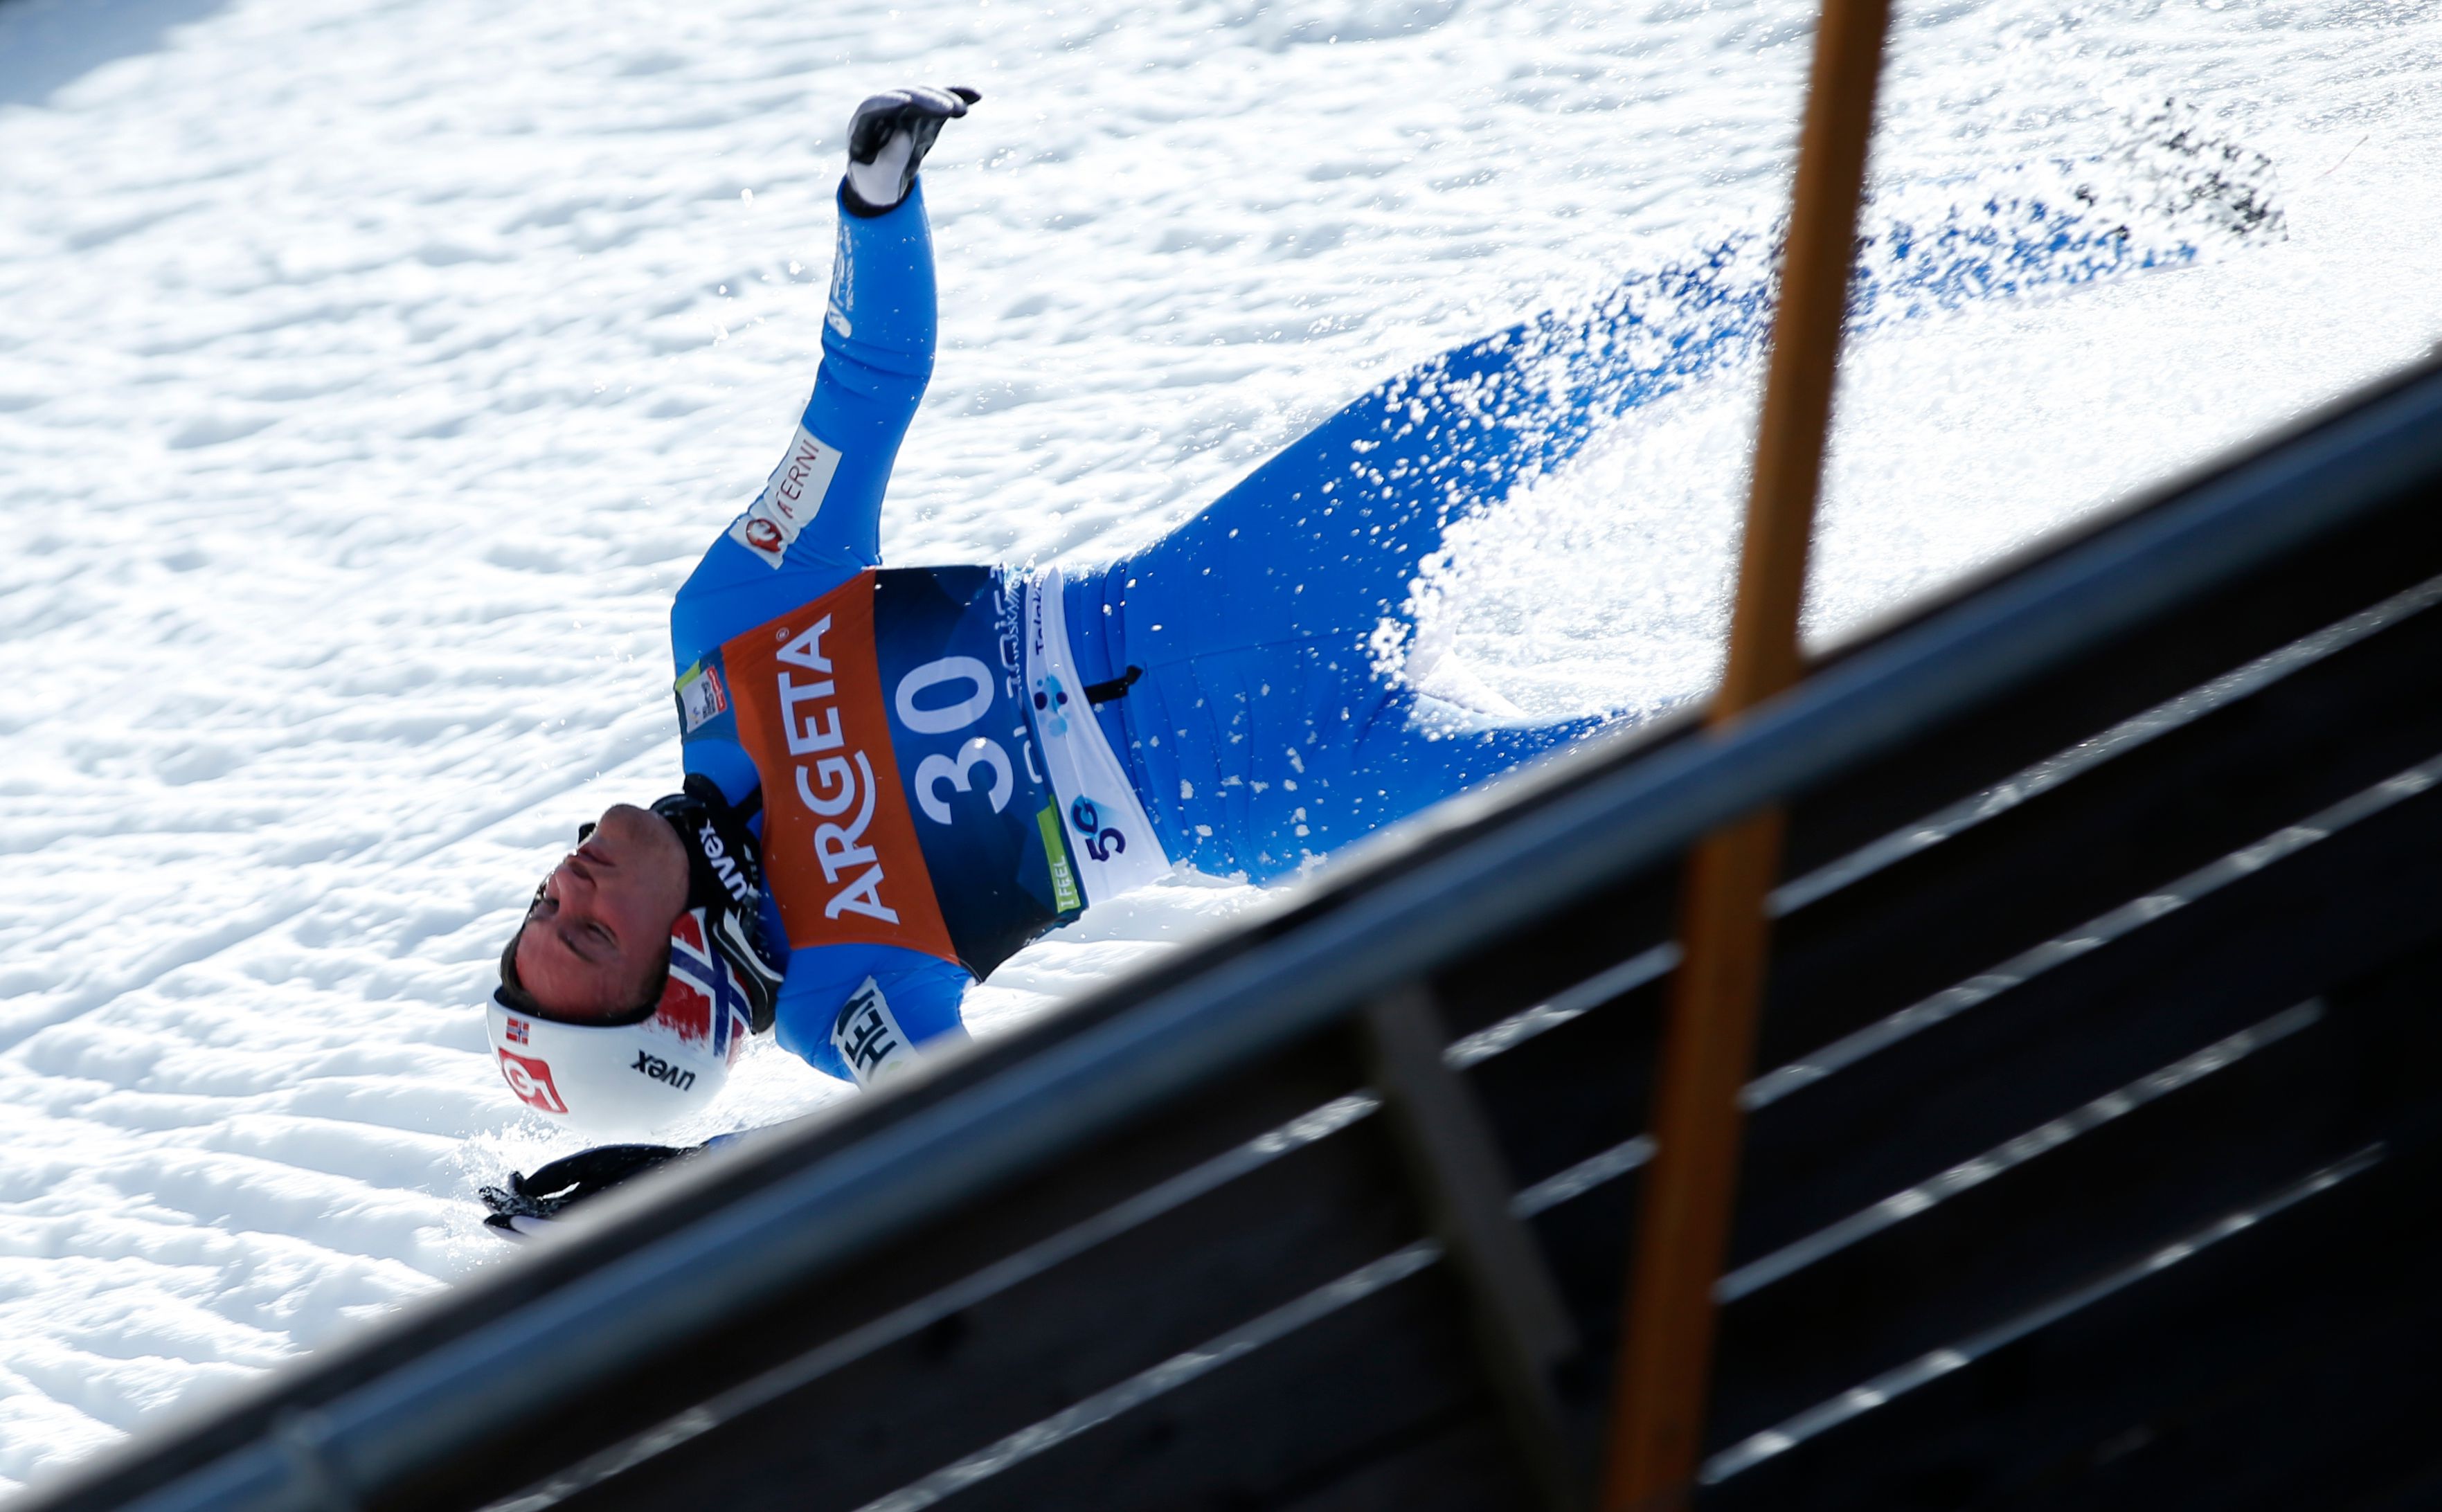 Norwegian ski jumper Tande hospitalized after heavy fall The Seattle Times